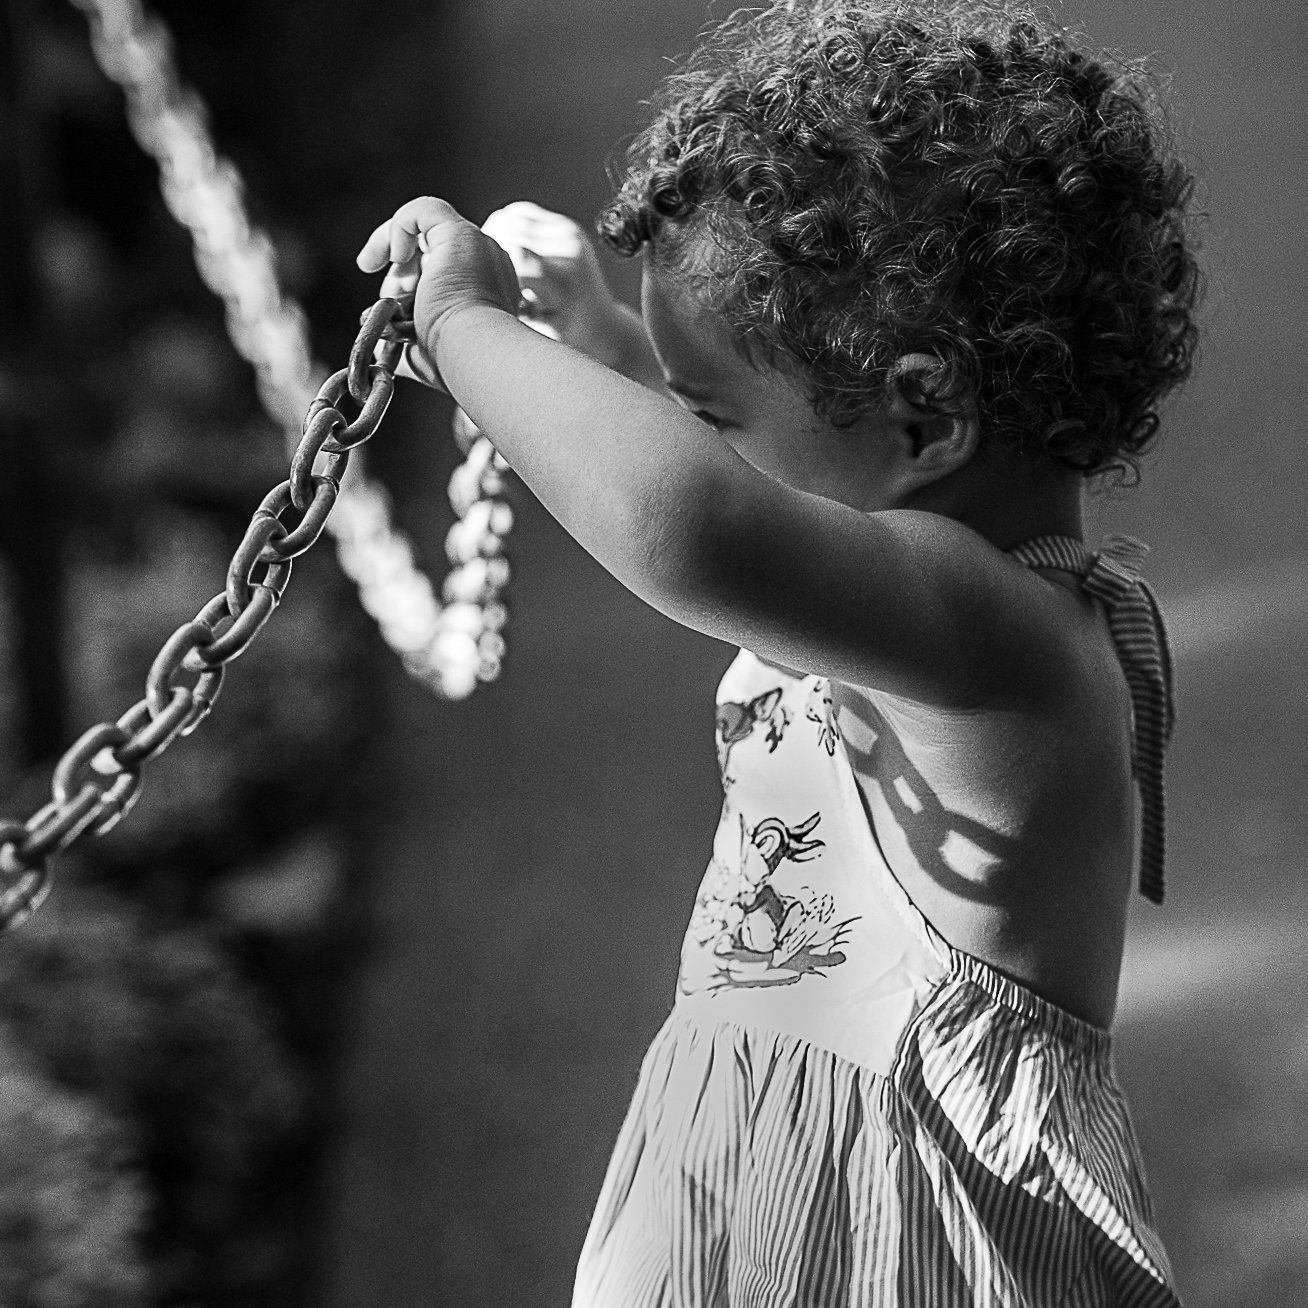 Natalie-DAngelo-Photography-Vancouver-BC-Canada-BlackWhite-Family-Portraits-Visual-Storyteller-young-girl-playing